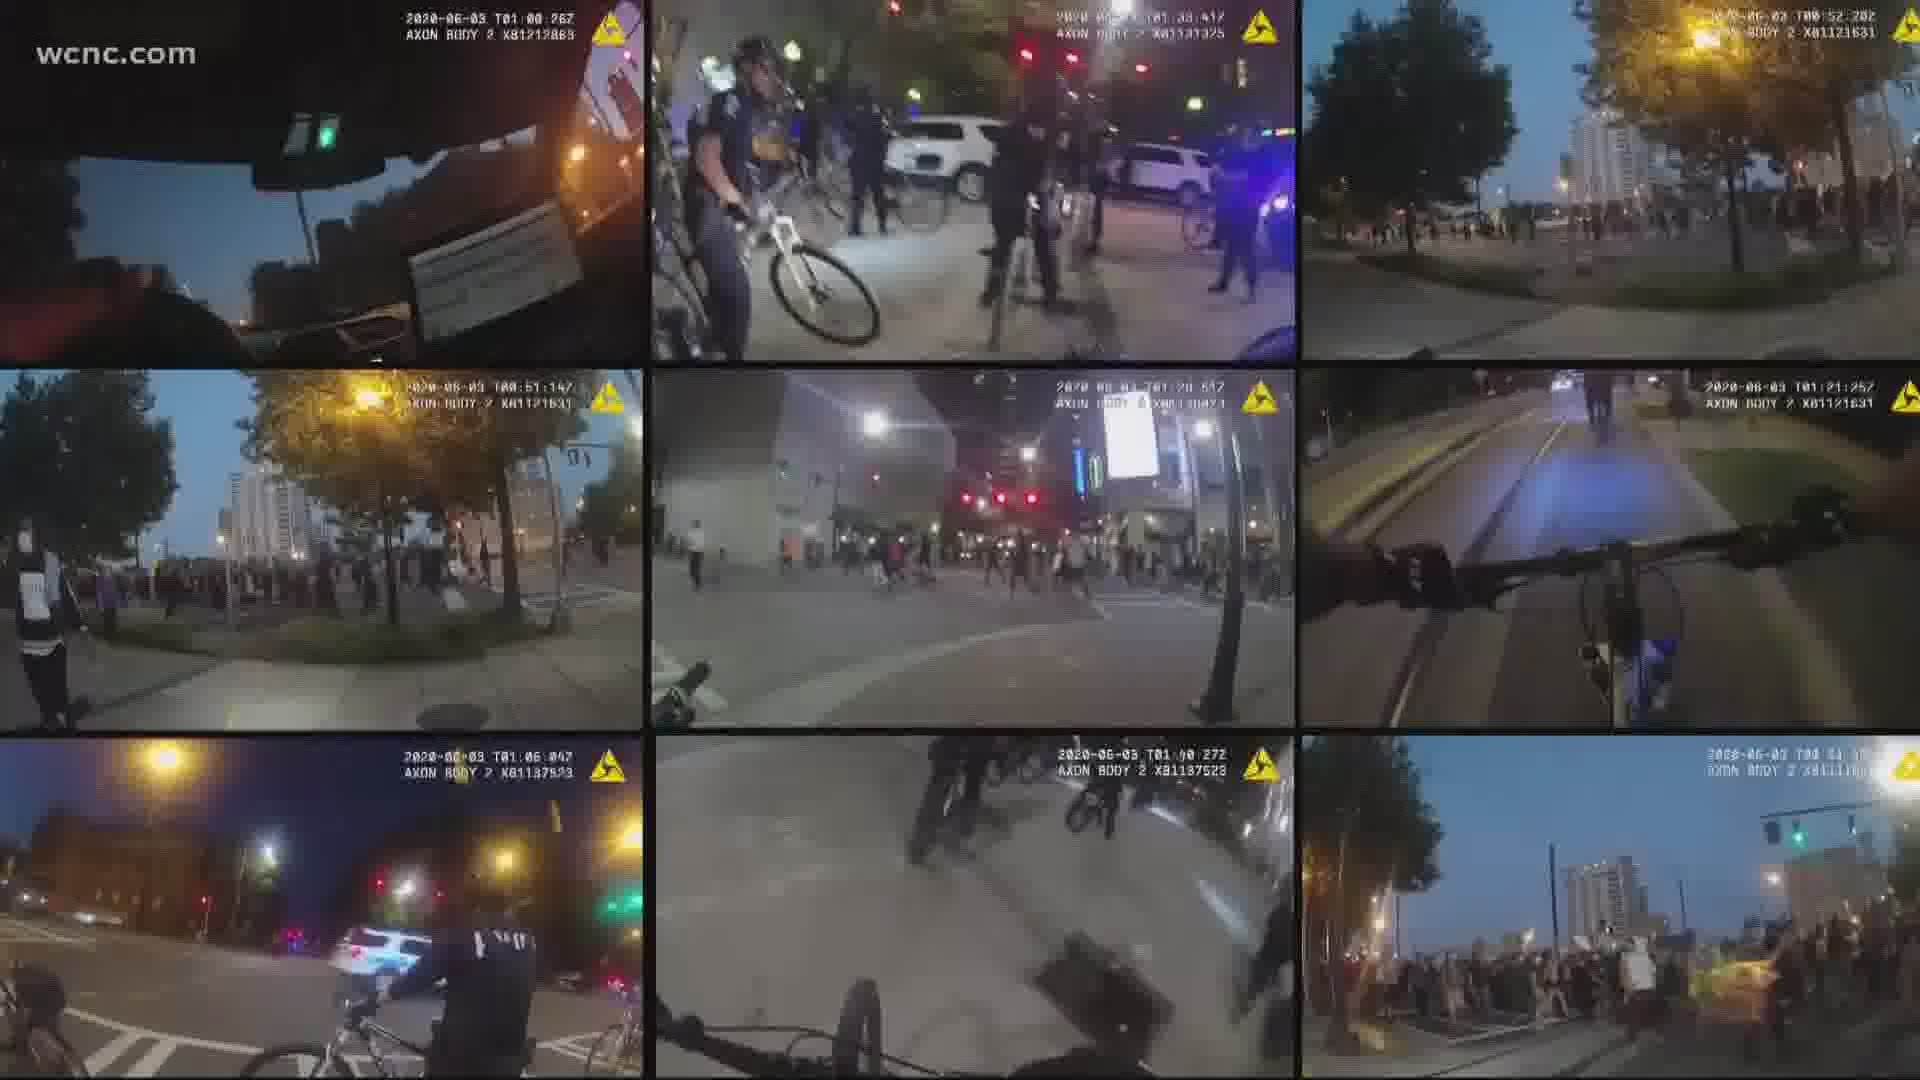 The body cam footage shows the protests that happened after the George Floyd killing back in June.